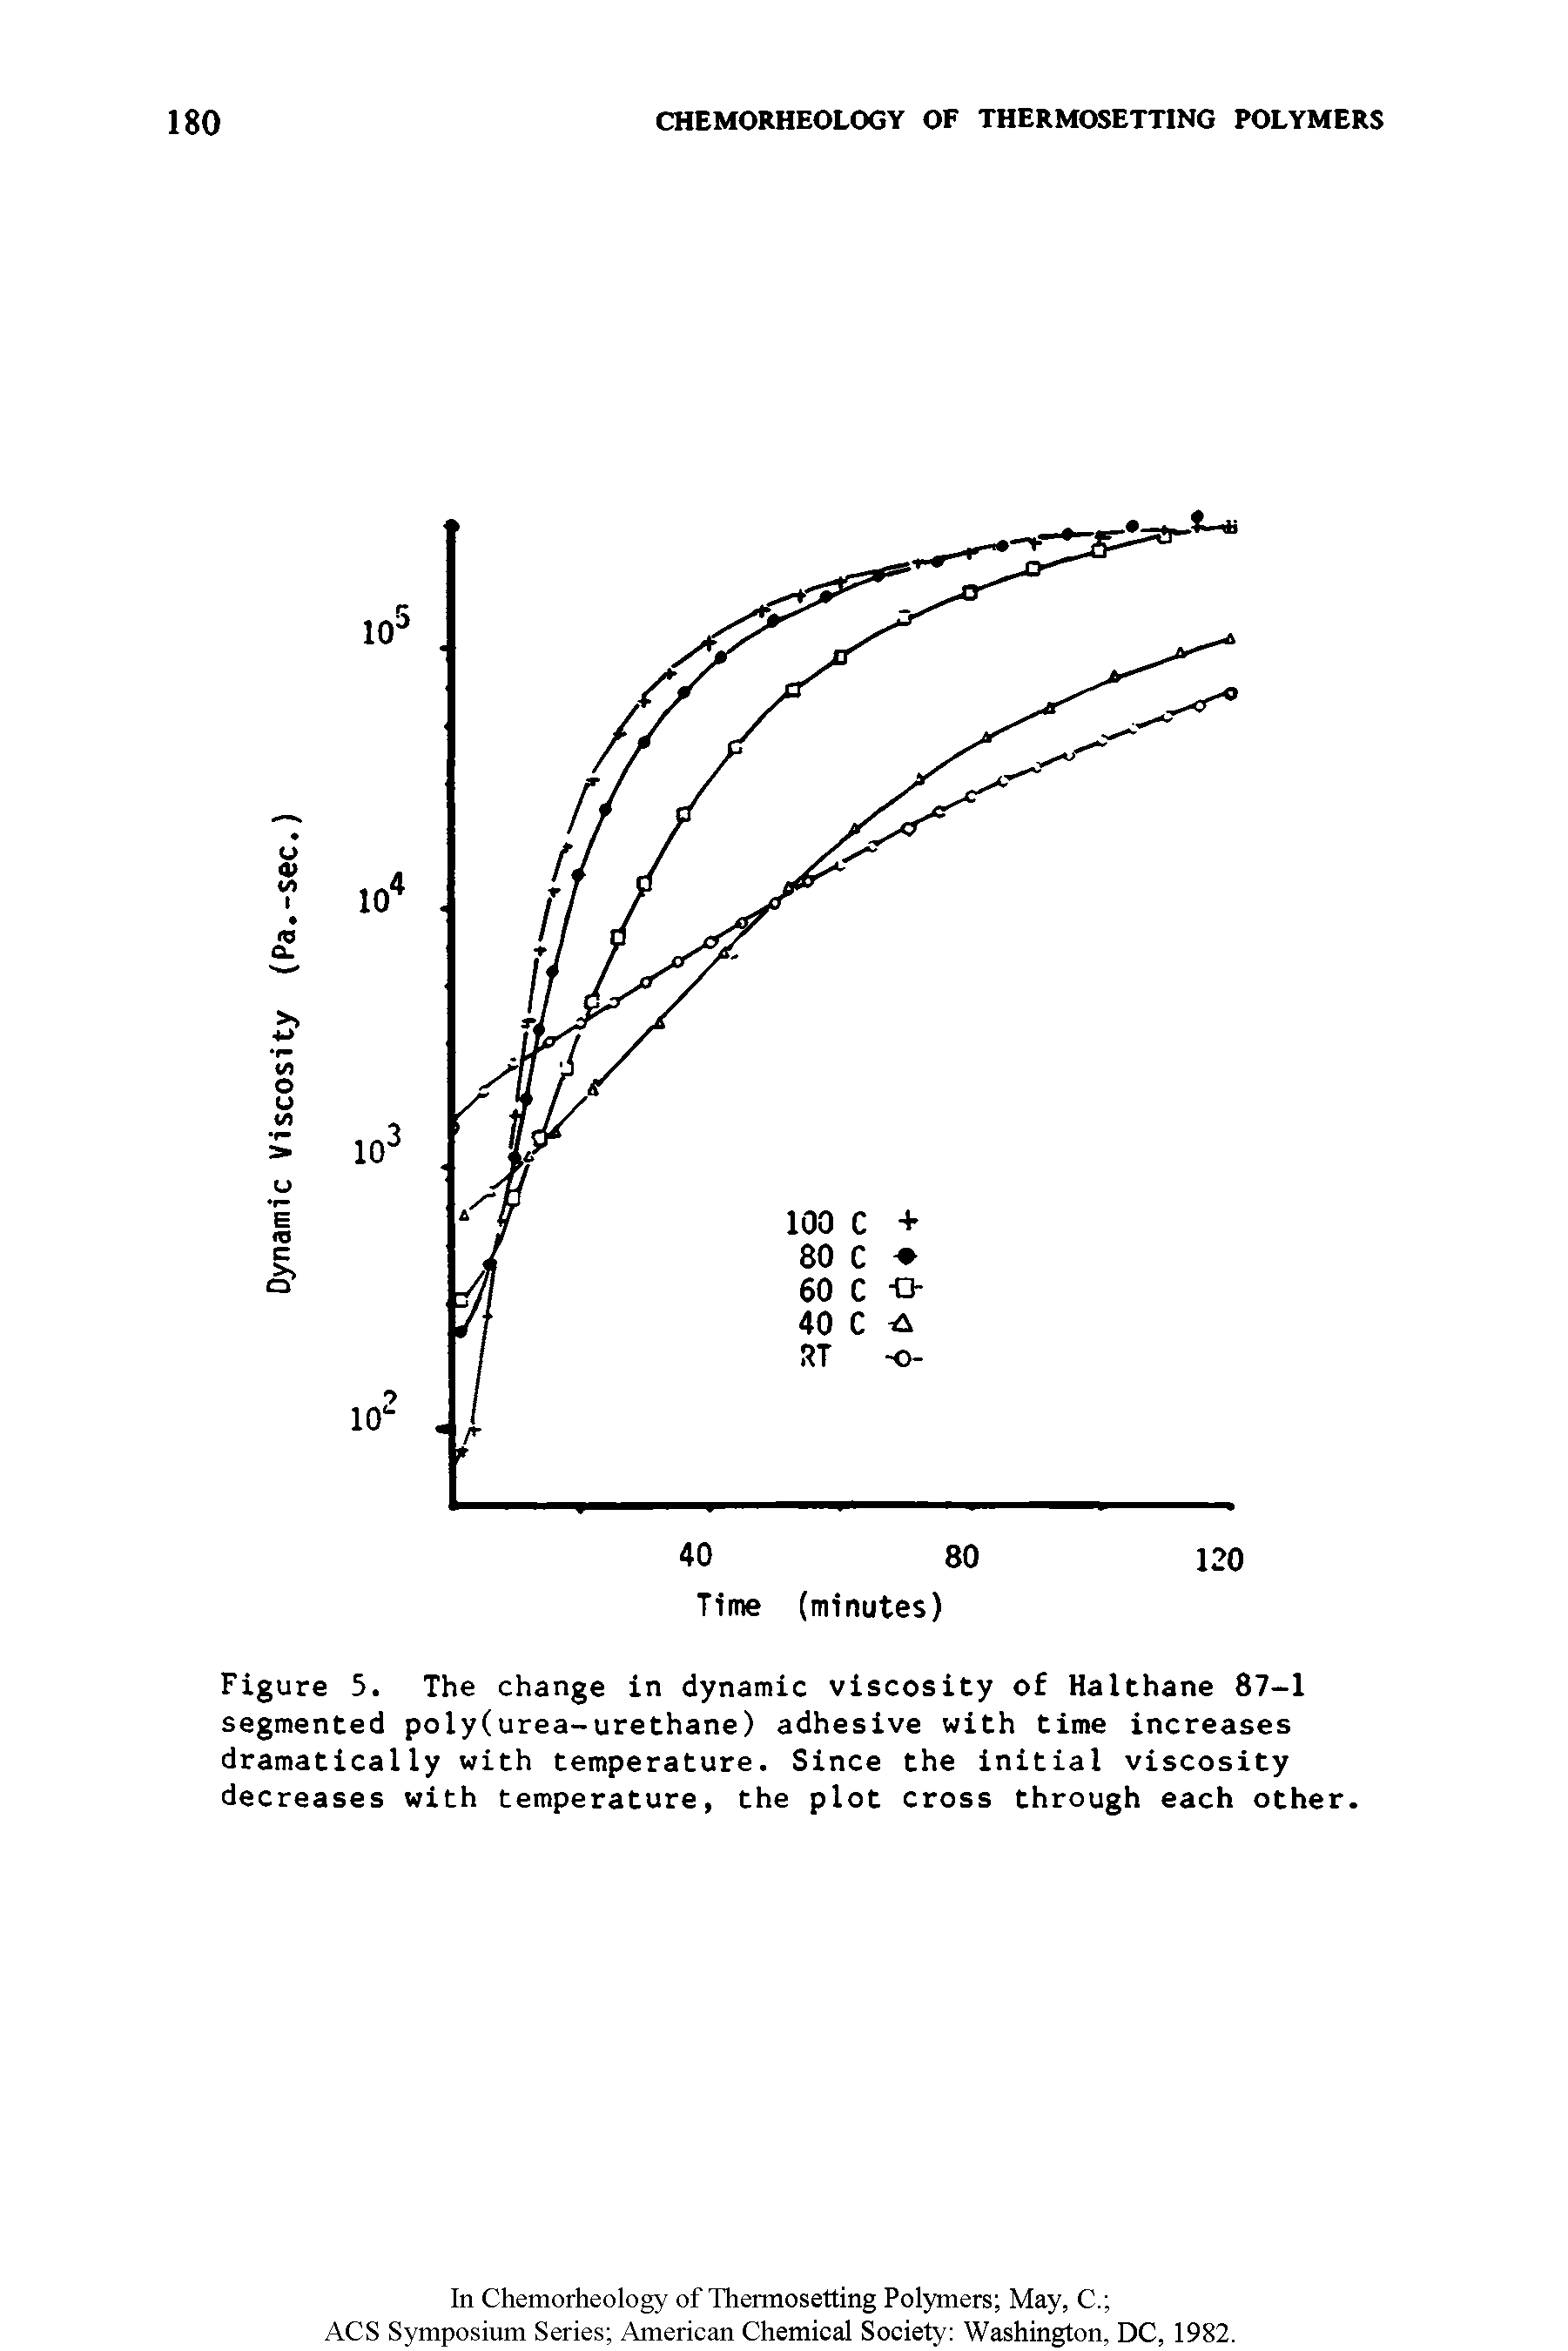 Figure 5. The change in dynamic viscosity of Halthane 87-1 segmented poly(urea-urethane) adhesive with time increases dramatically with temperature. Since the initial viscosity decreases with temperature, the plot cross through each other.